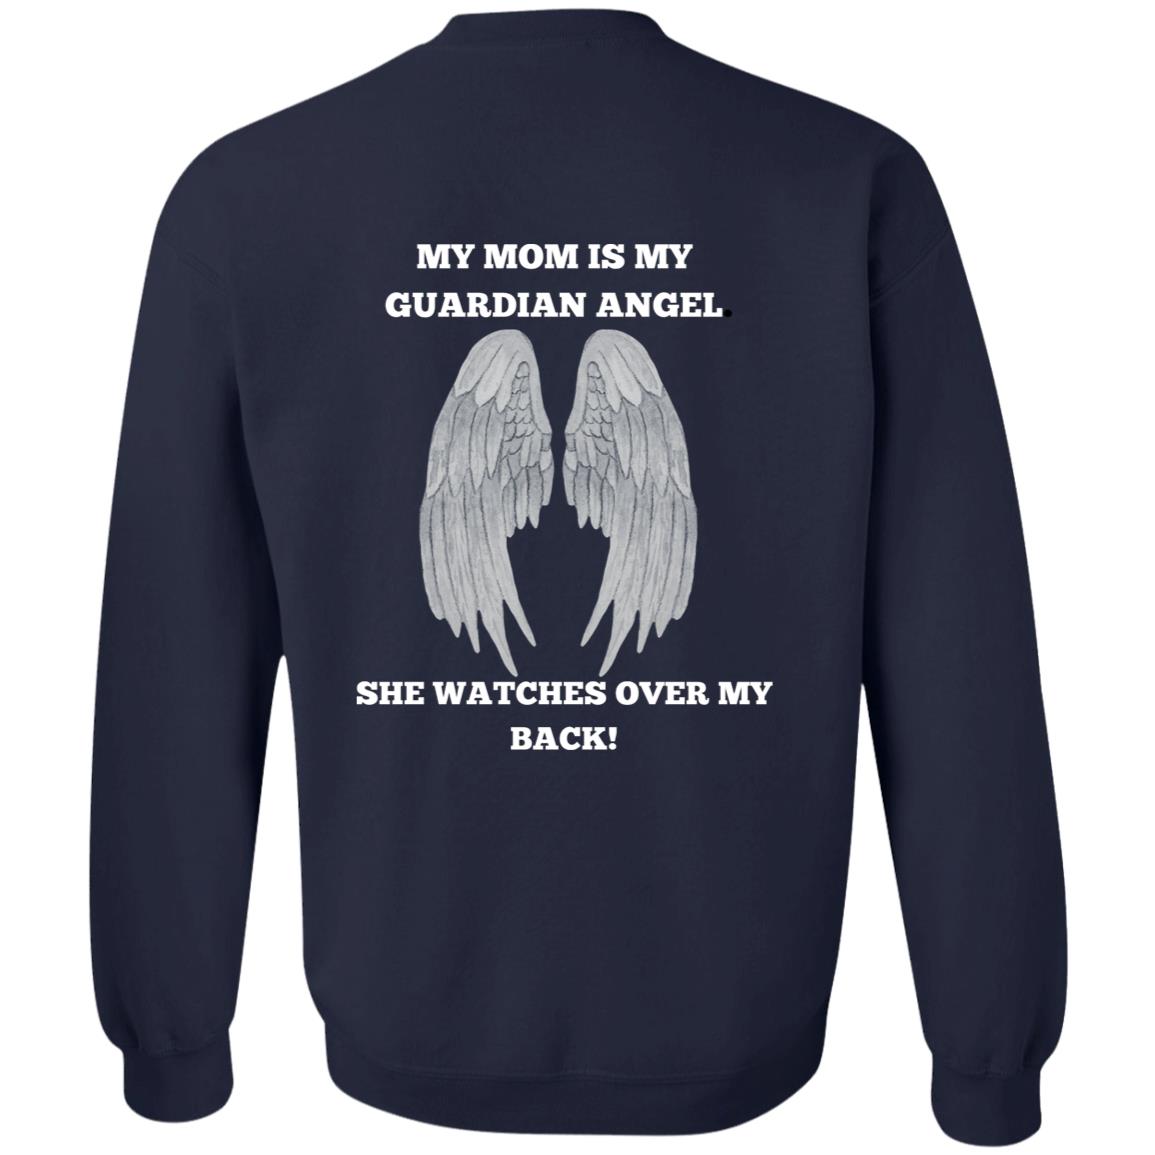 Get trendy with My Mom is My Guardian Angel Sweatshirt -  available at Good Gift Company. Grab yours for $29.88 today!